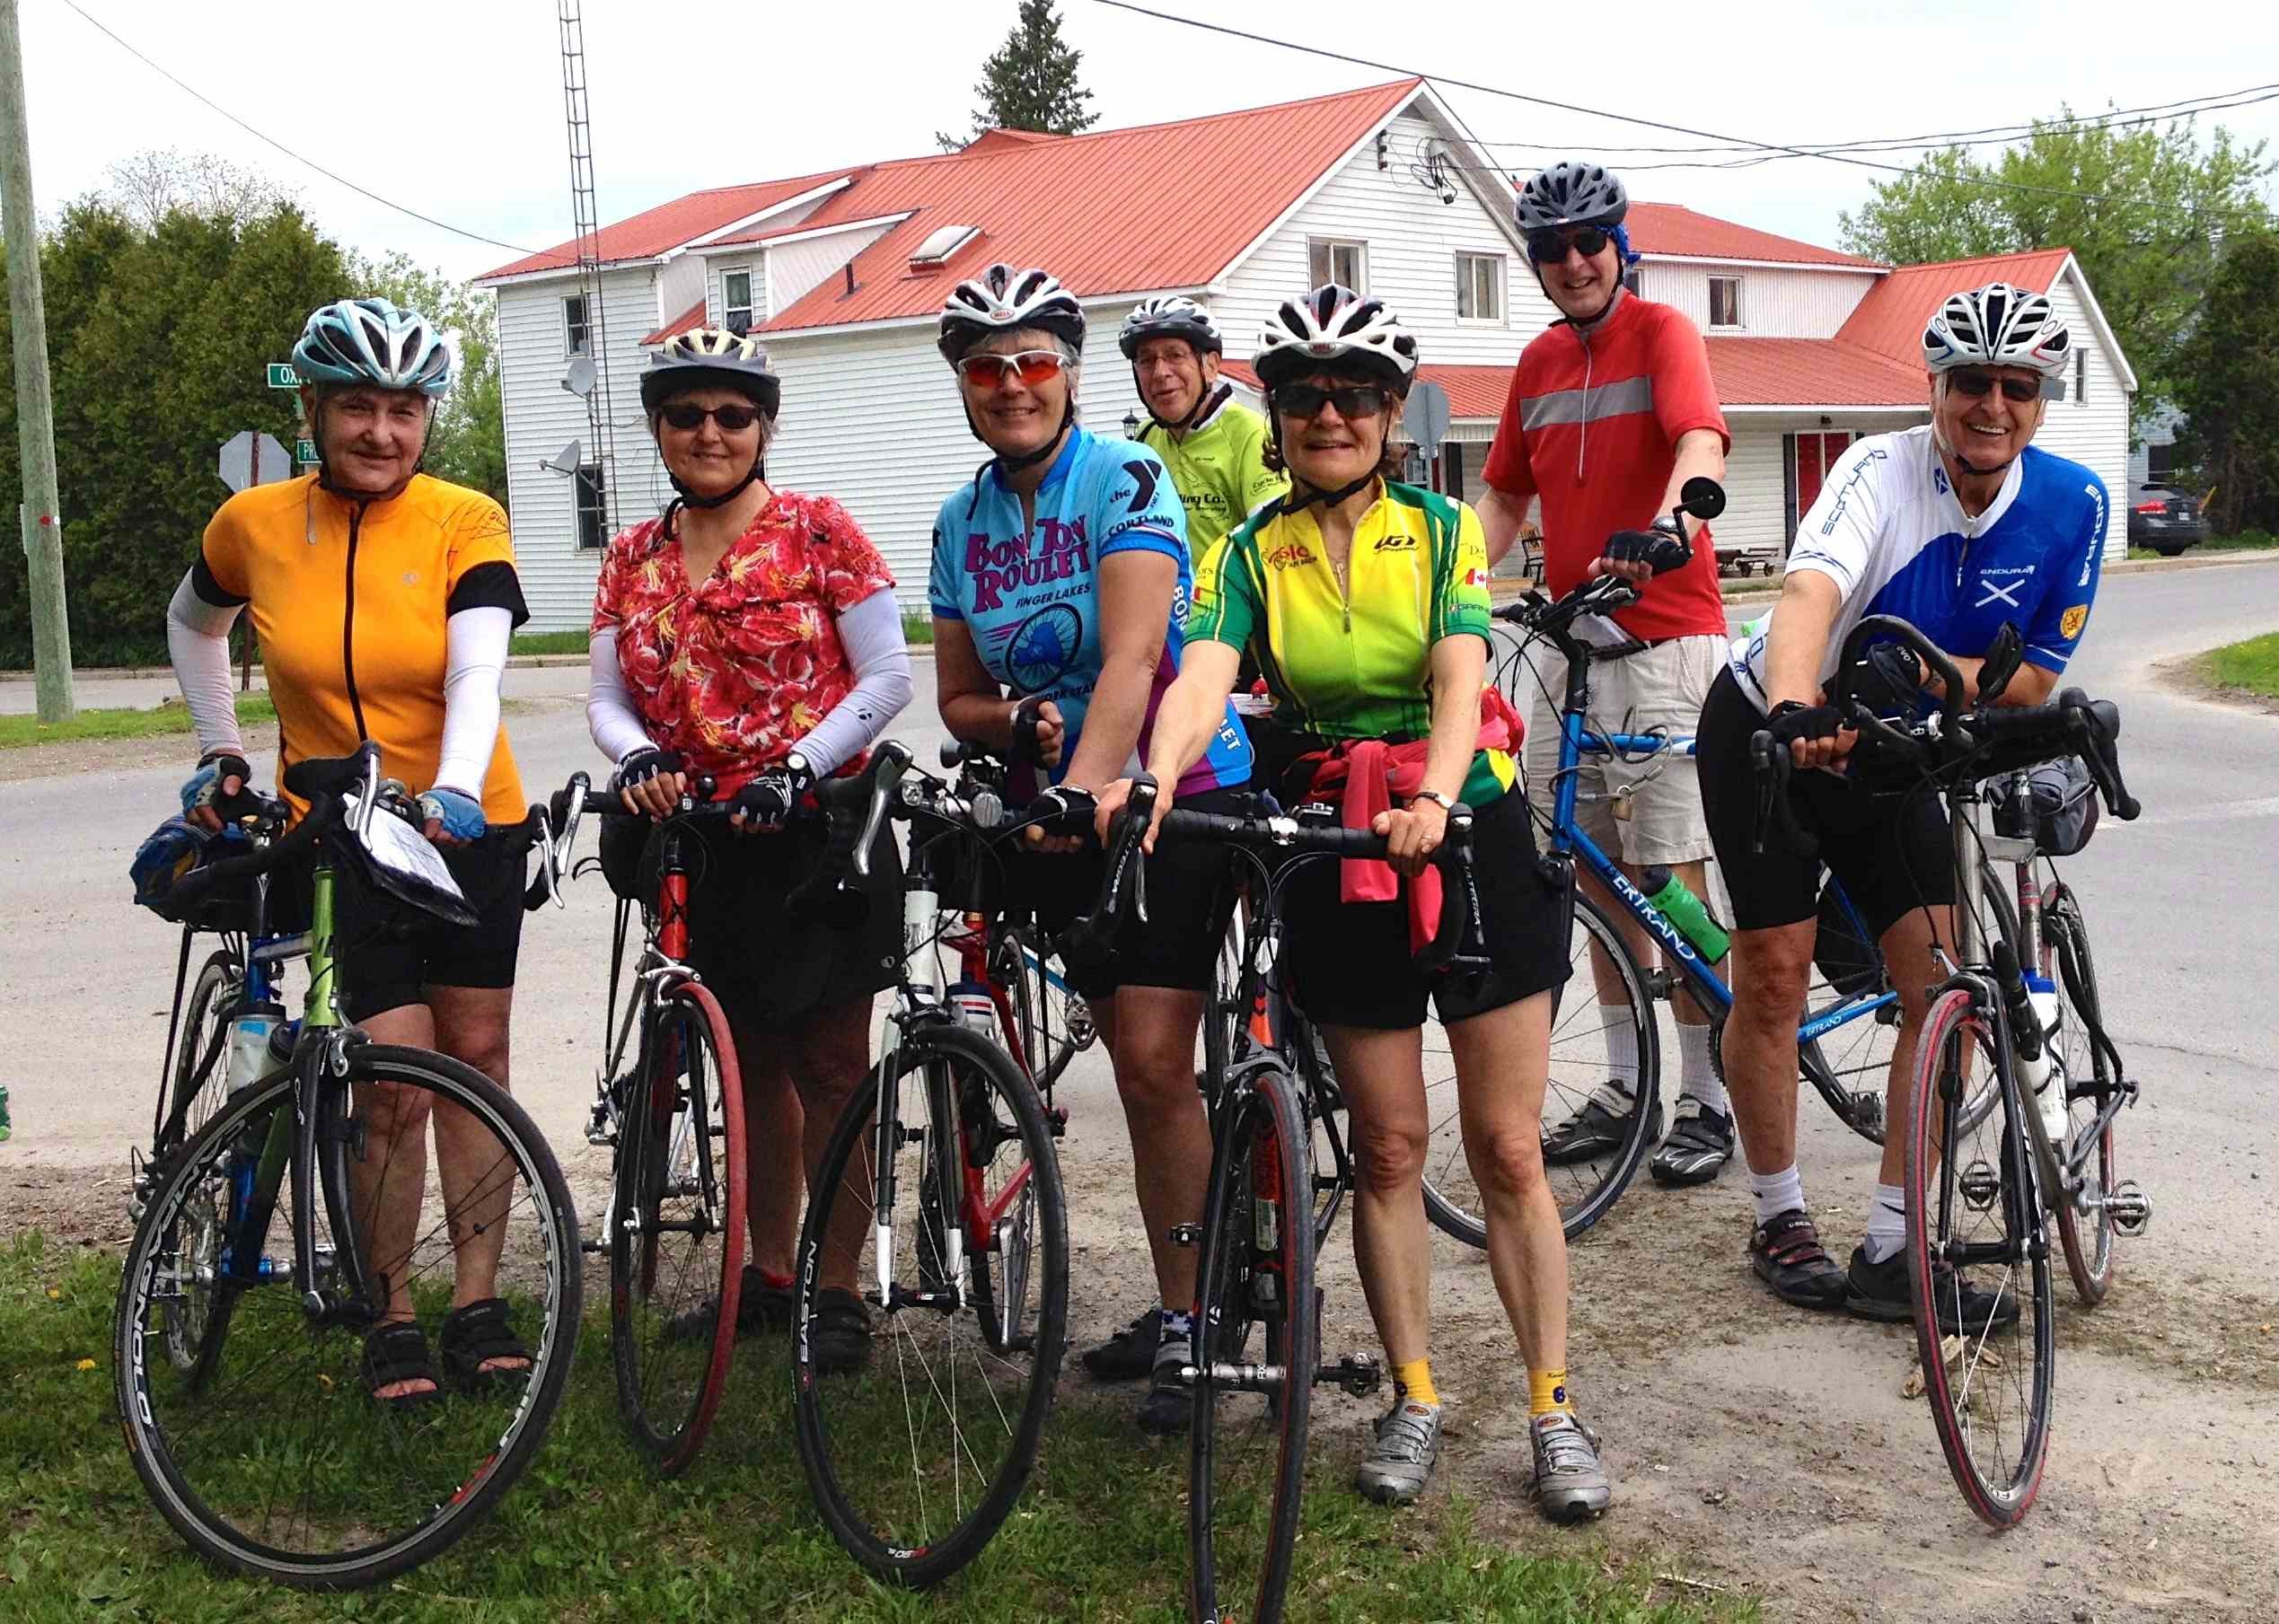 7 cyclists line up for a photo in Bishops Mills, North Grenville as part of MS Bike